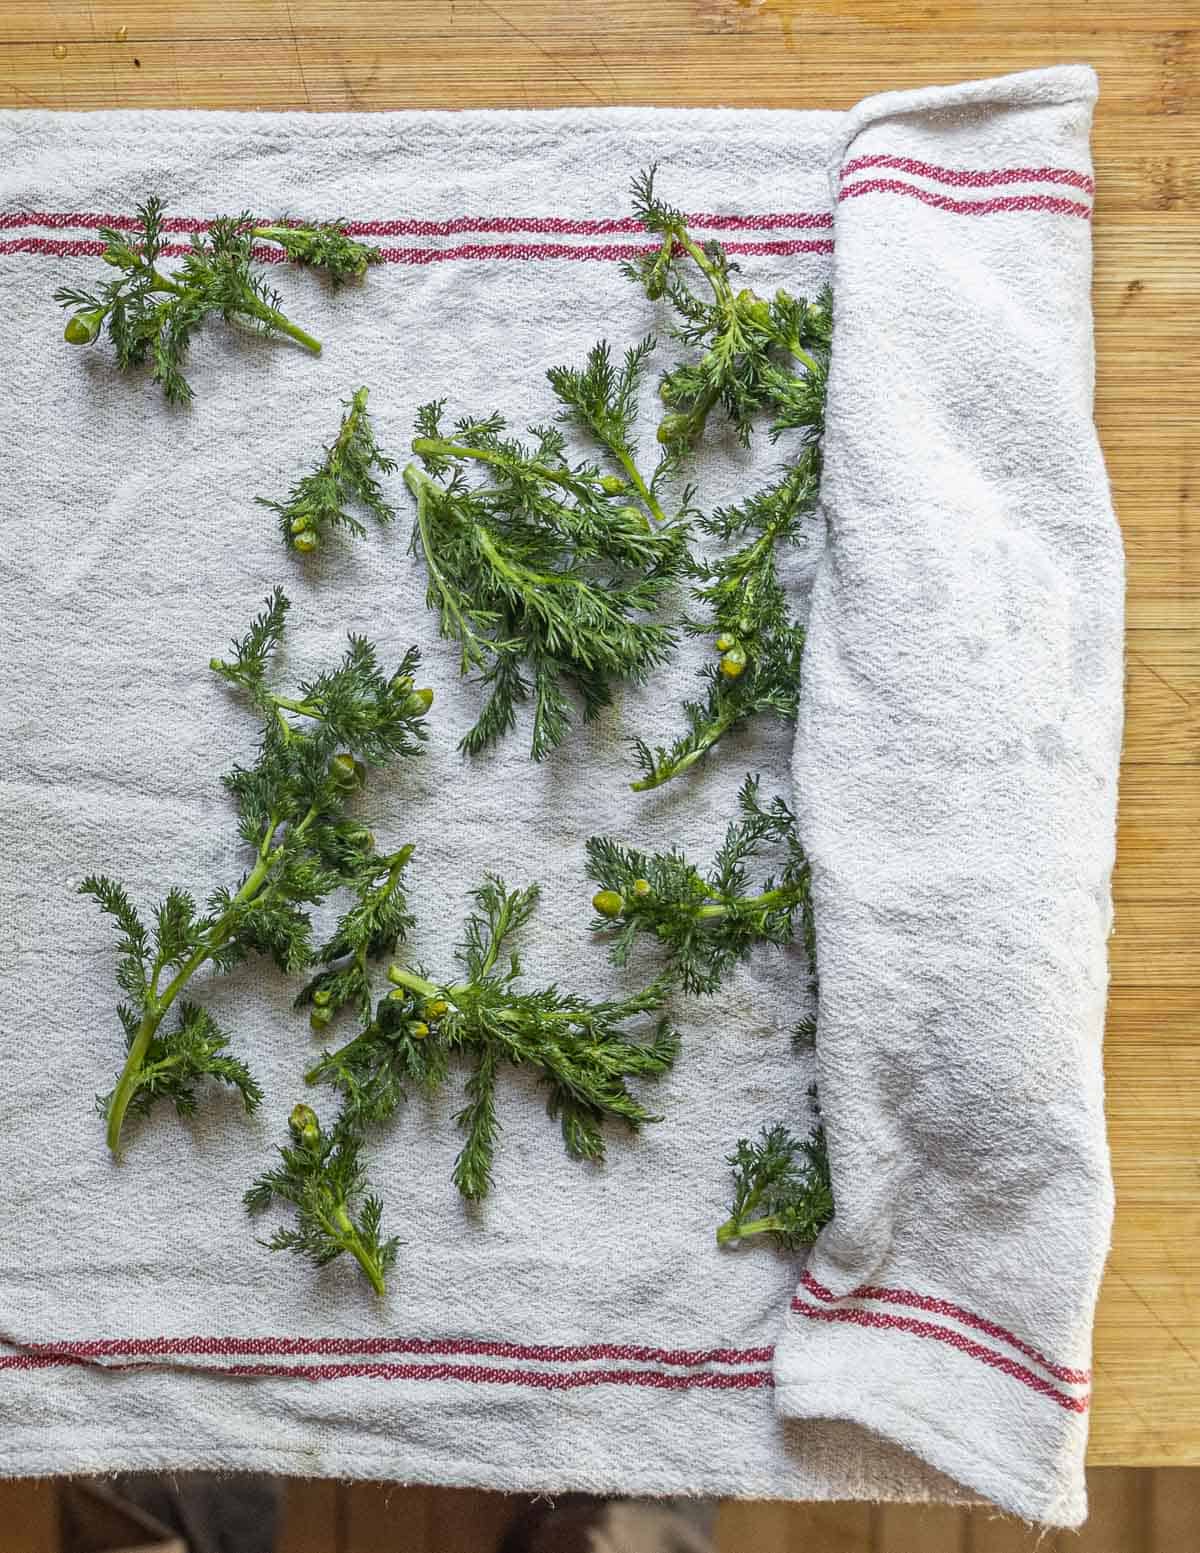 Rolling soaked pineapple weed in a towel for storing in the fridge. 